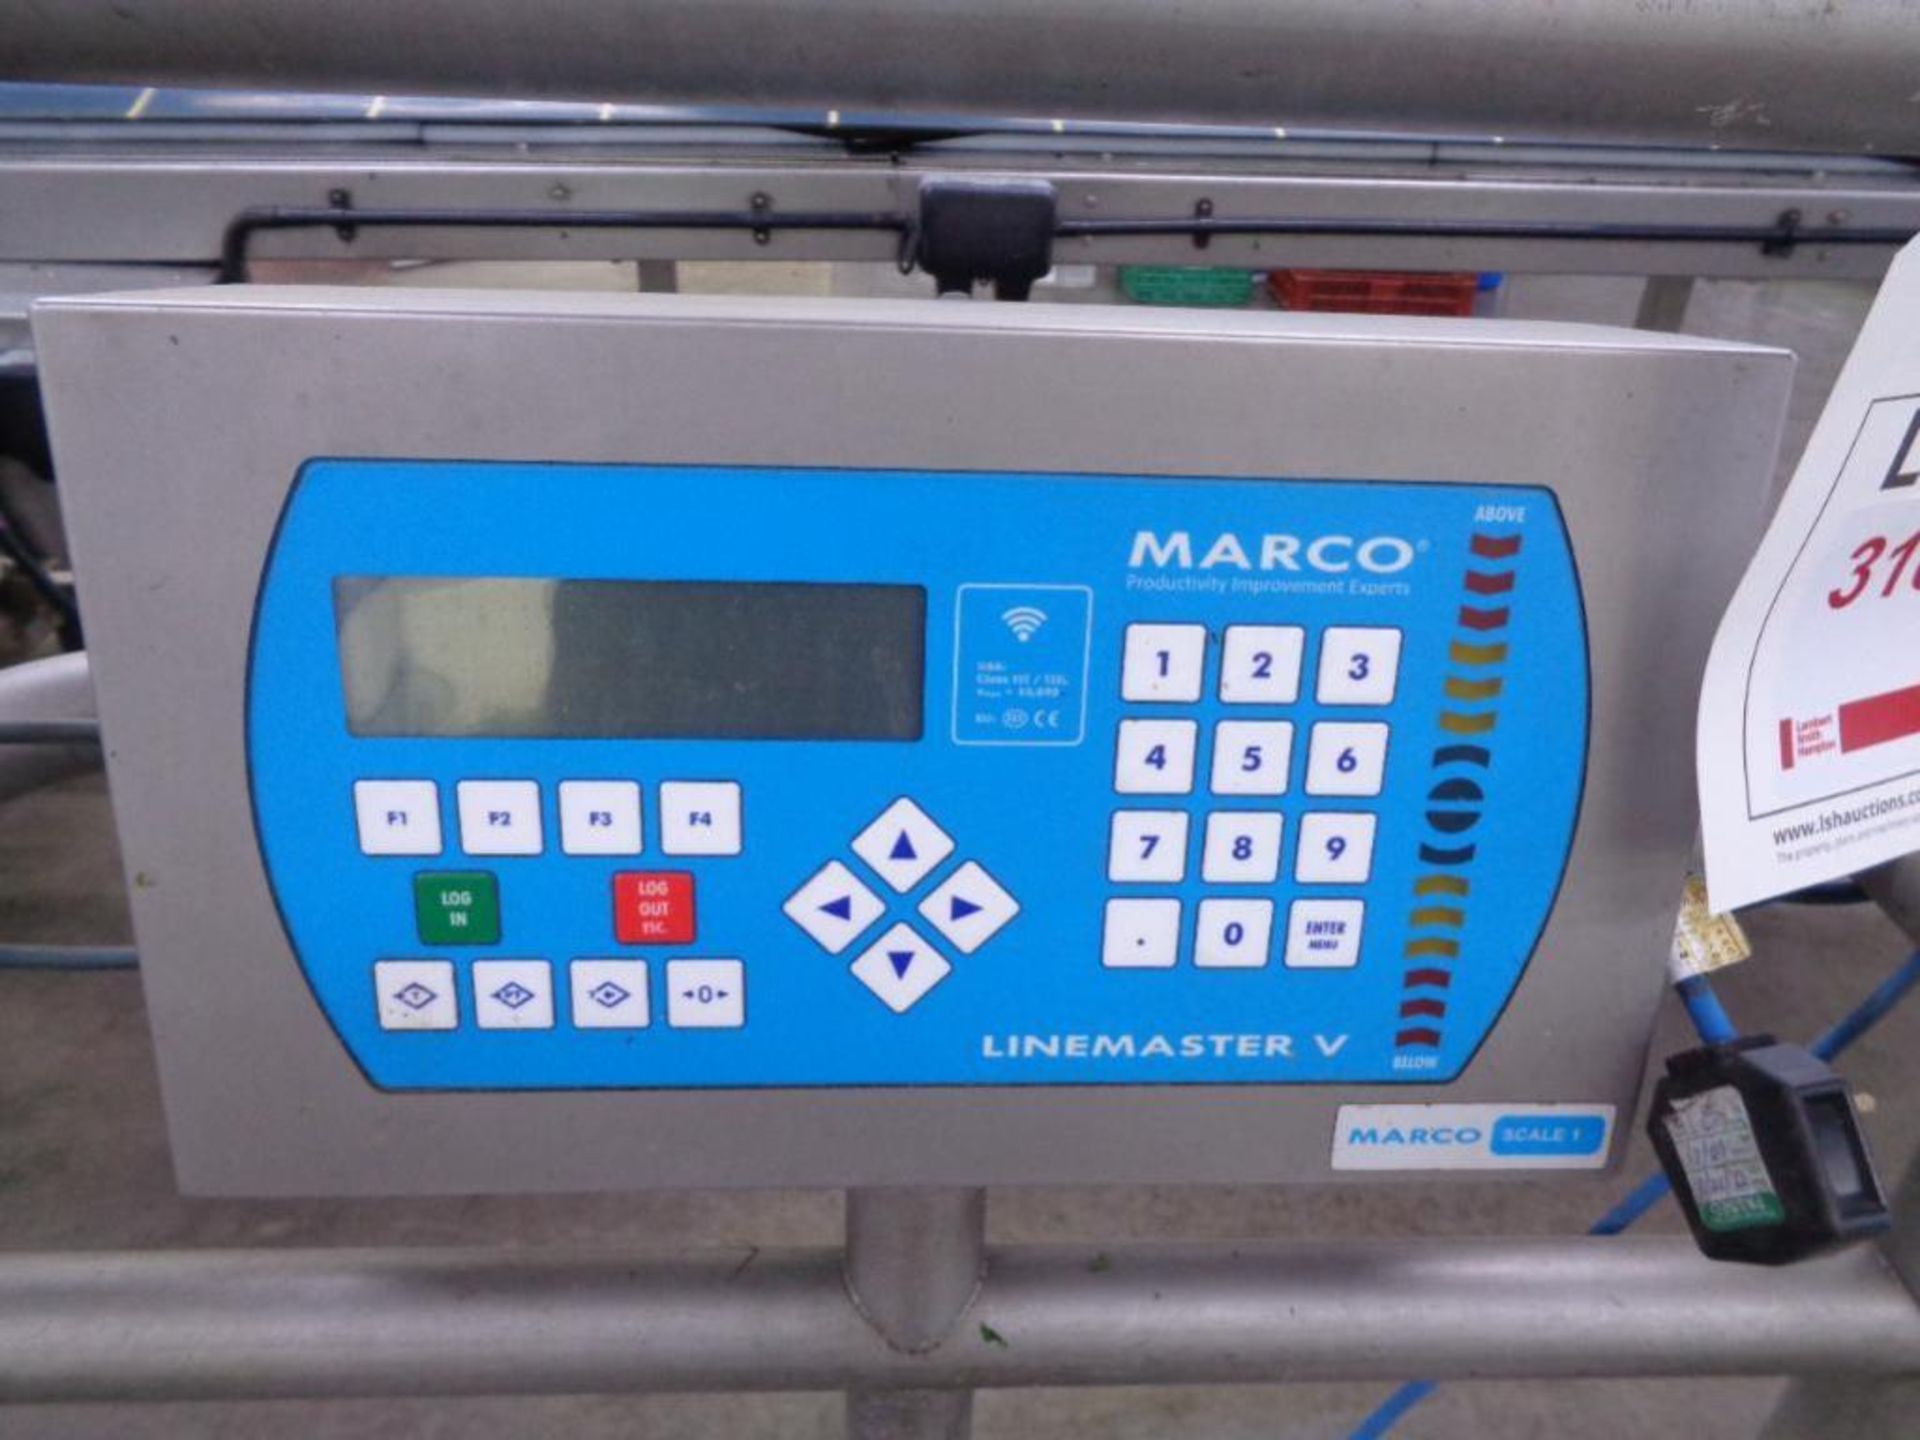 Marco Linemaster V D103471 stainless steel product weigh scales - Image 2 of 4